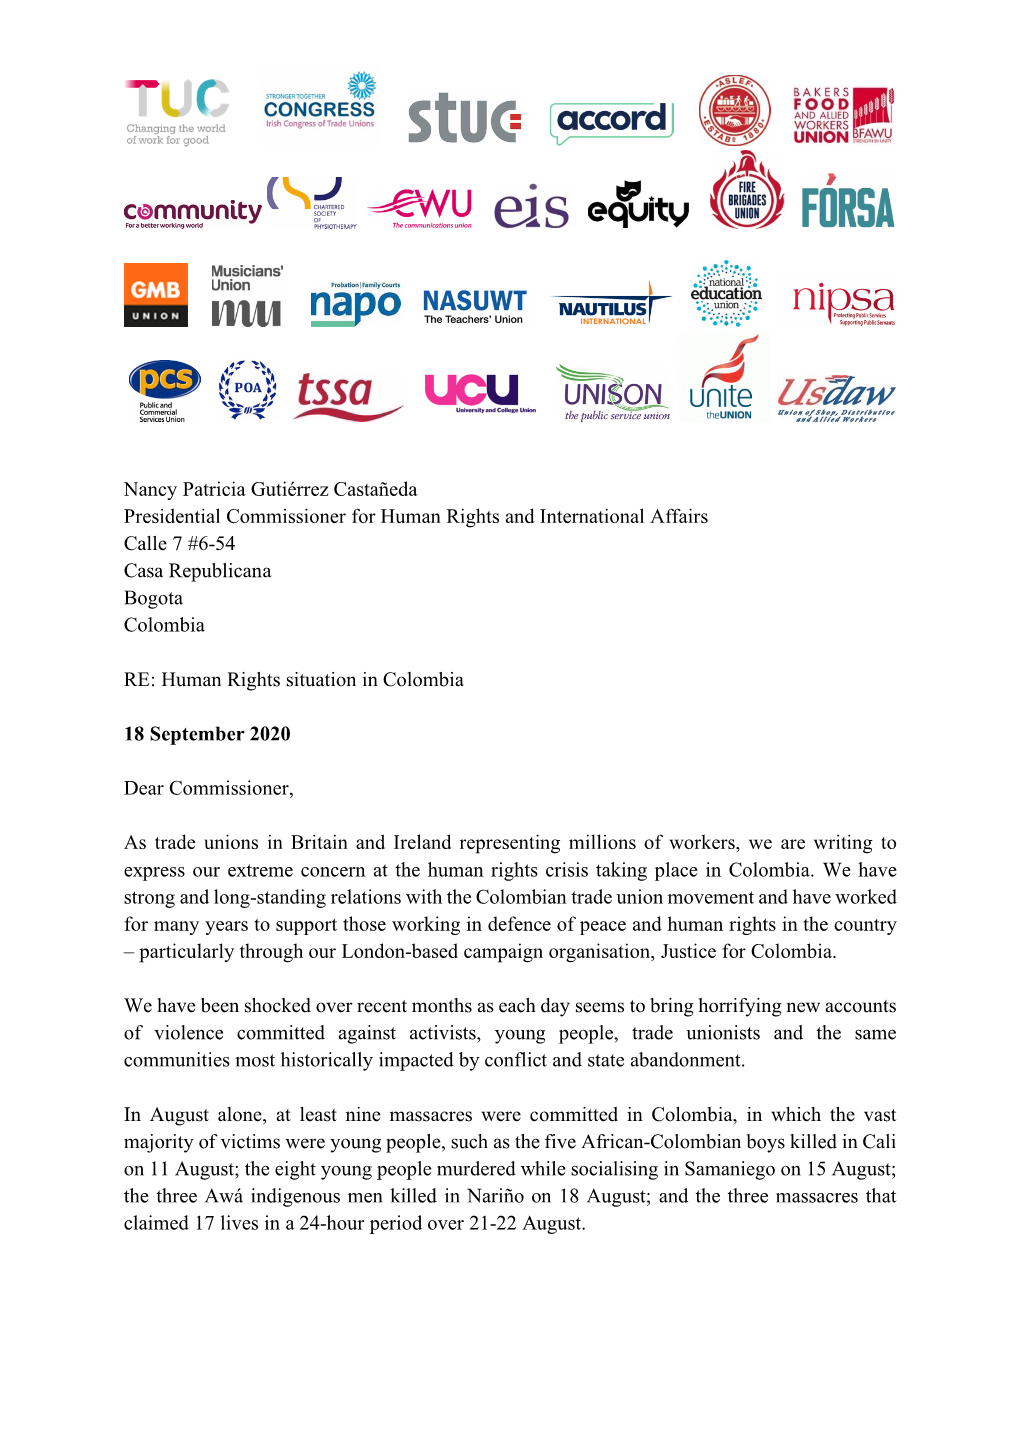 Letter to Colombian Human Rights Commissioner From